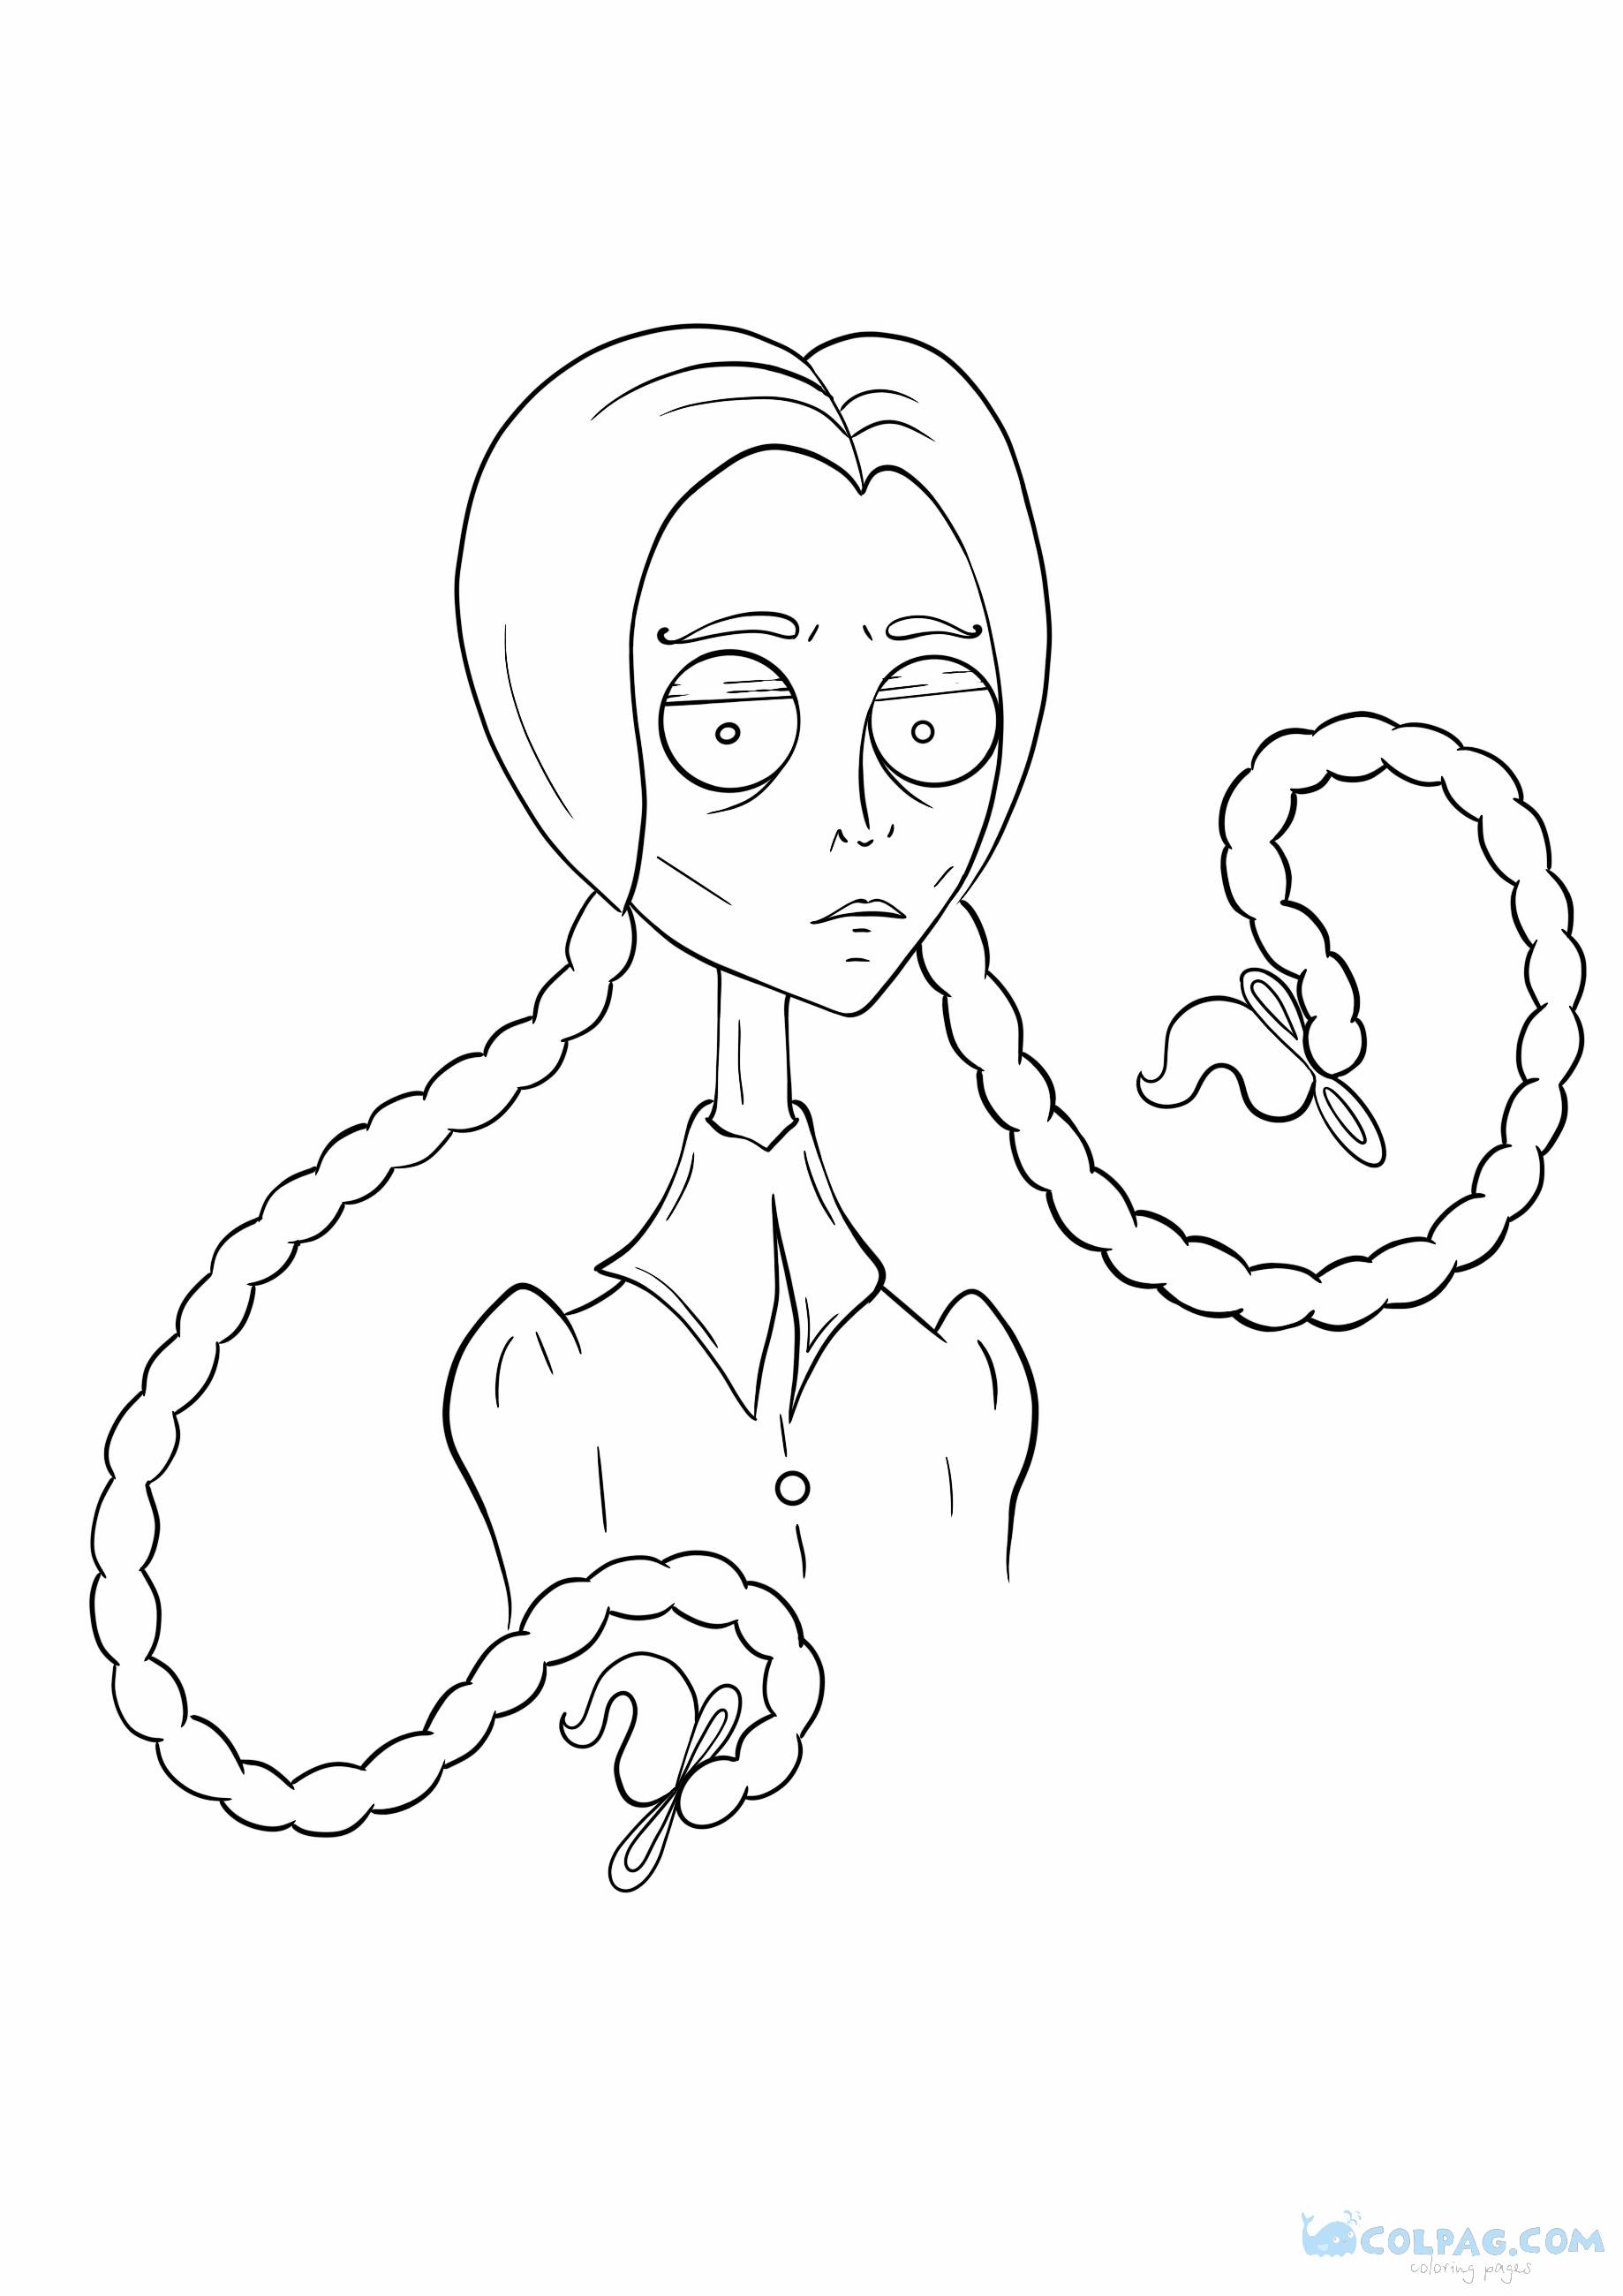 wednesday-addams-coloring-page-colpag-com-15